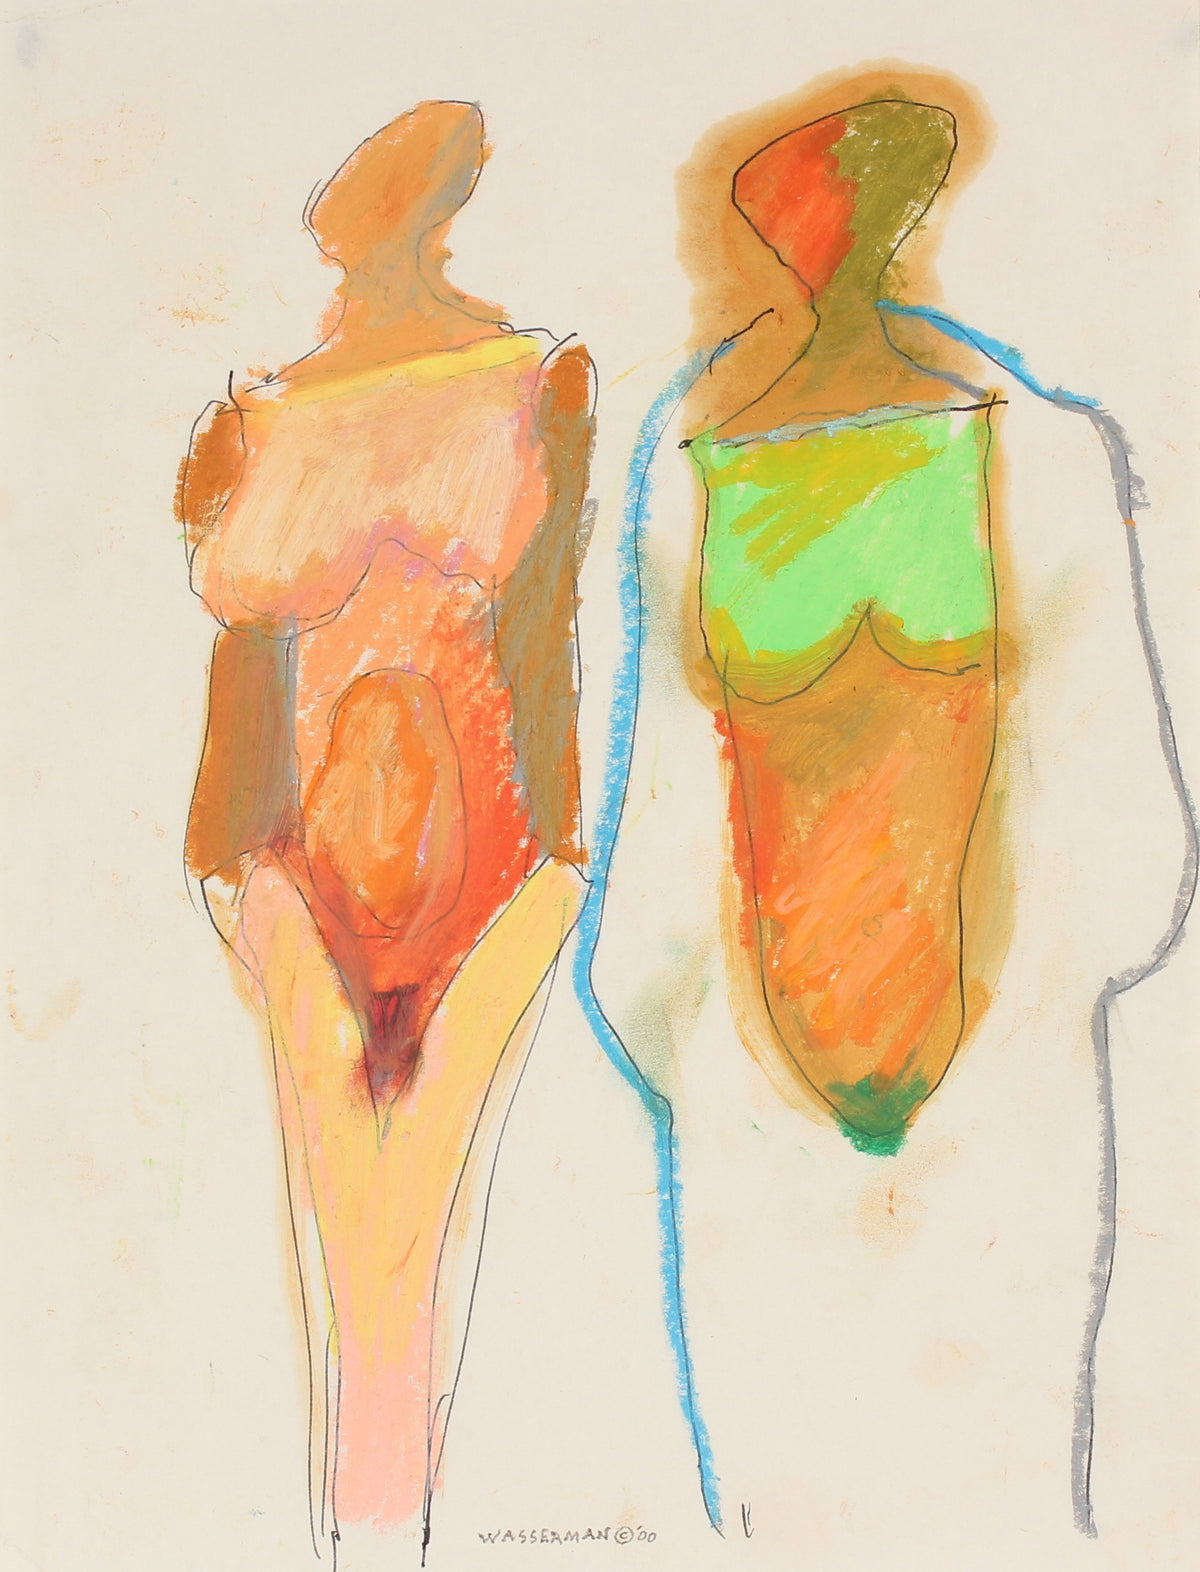 Colorful Abstracted Figures &lt;br&gt; Circa 2000 Pastel and Ink&lt;br&gt;&lt;br&gt;#89517